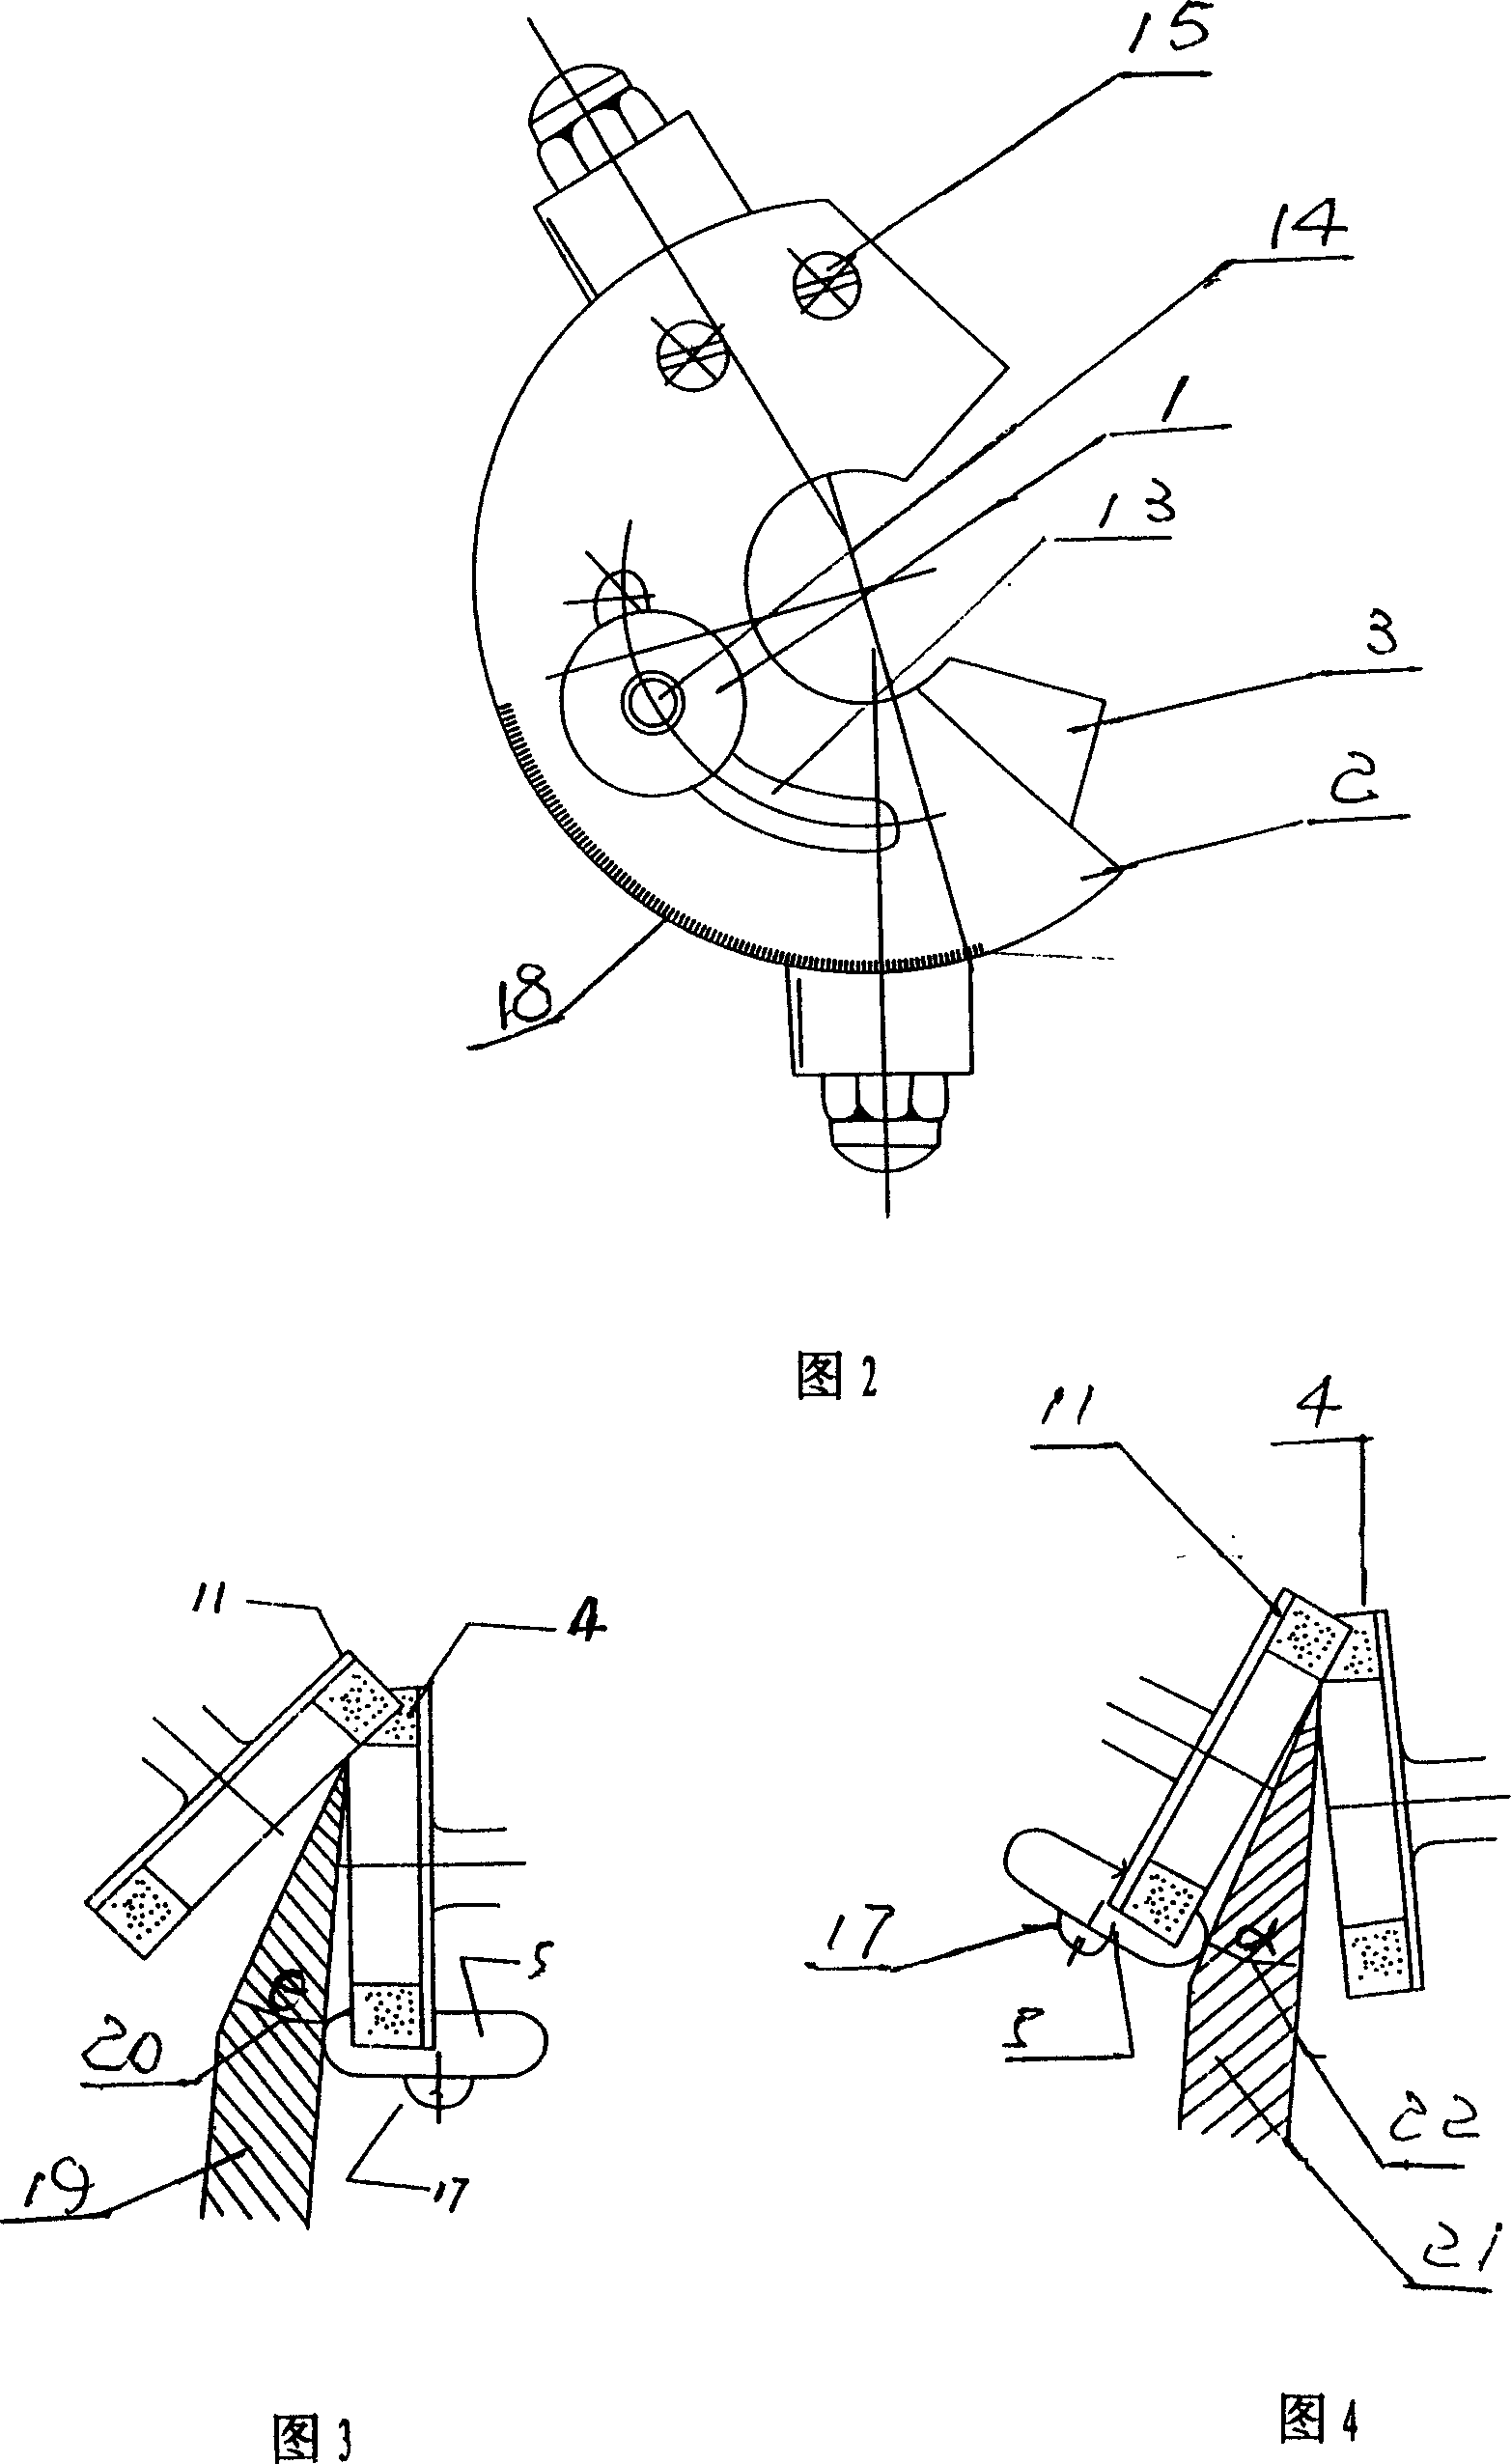 Knife fine grinding apparatus